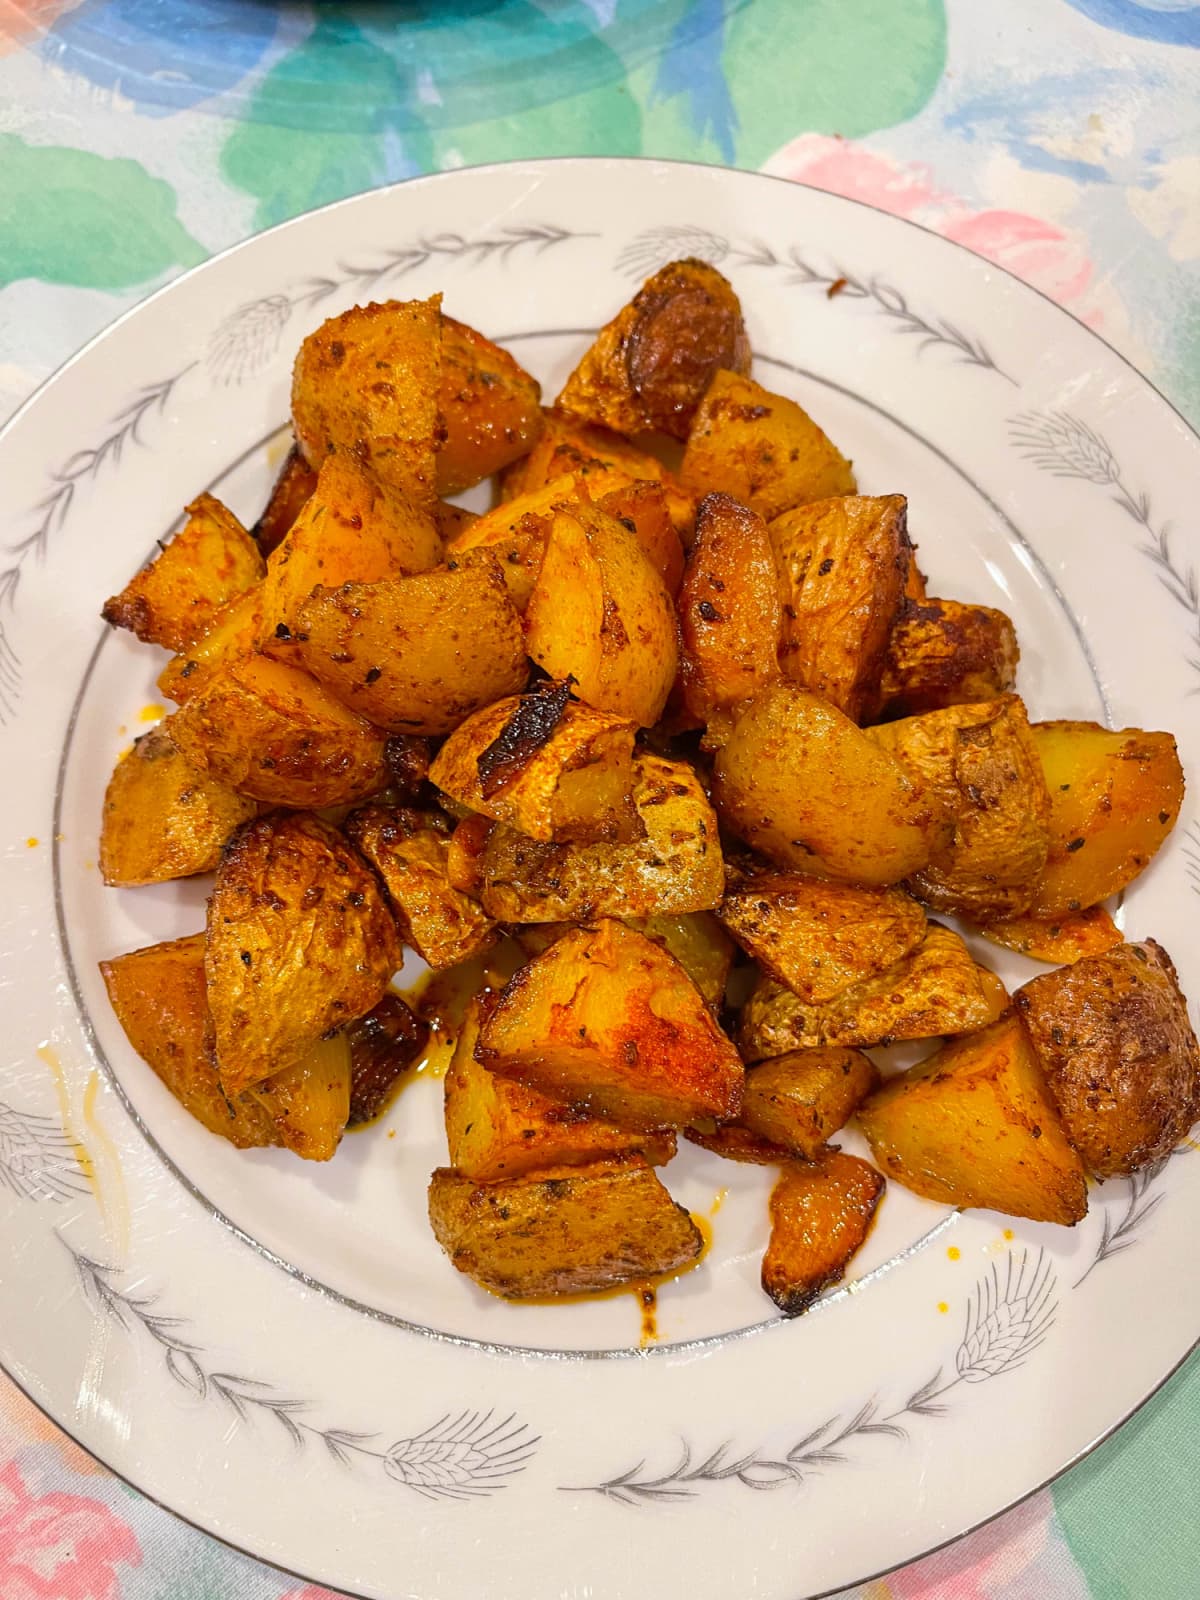 Plate of roasted potato cubes